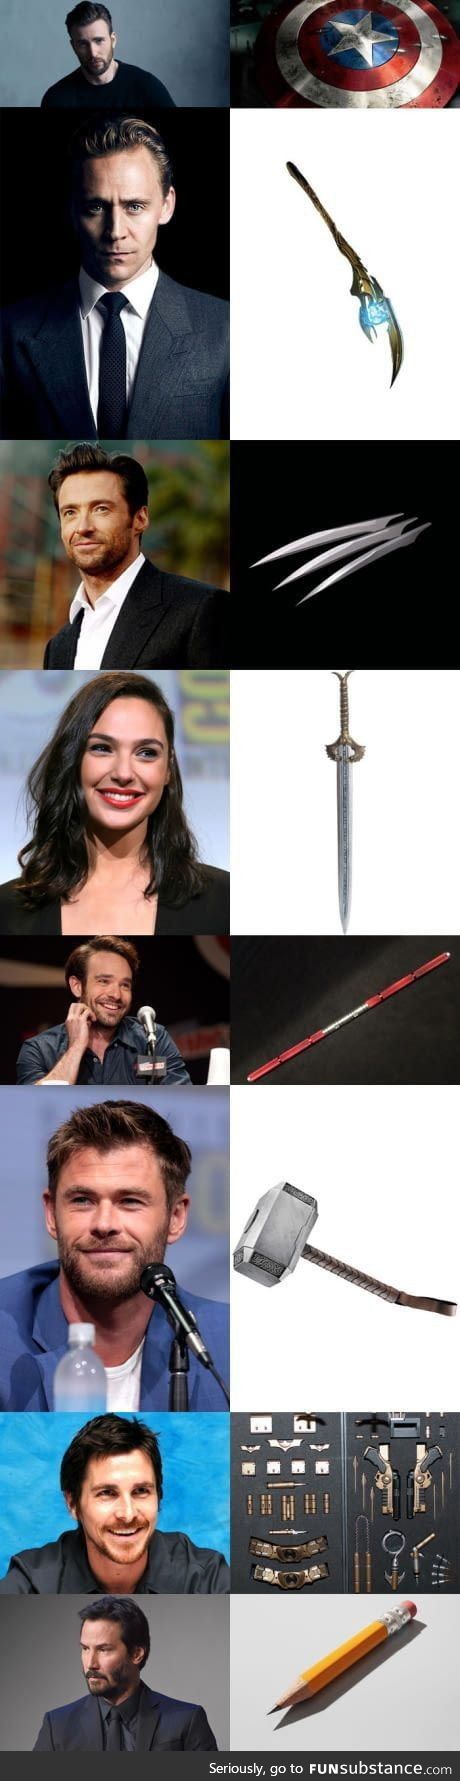 Some cool people and weapons they are deadly with.